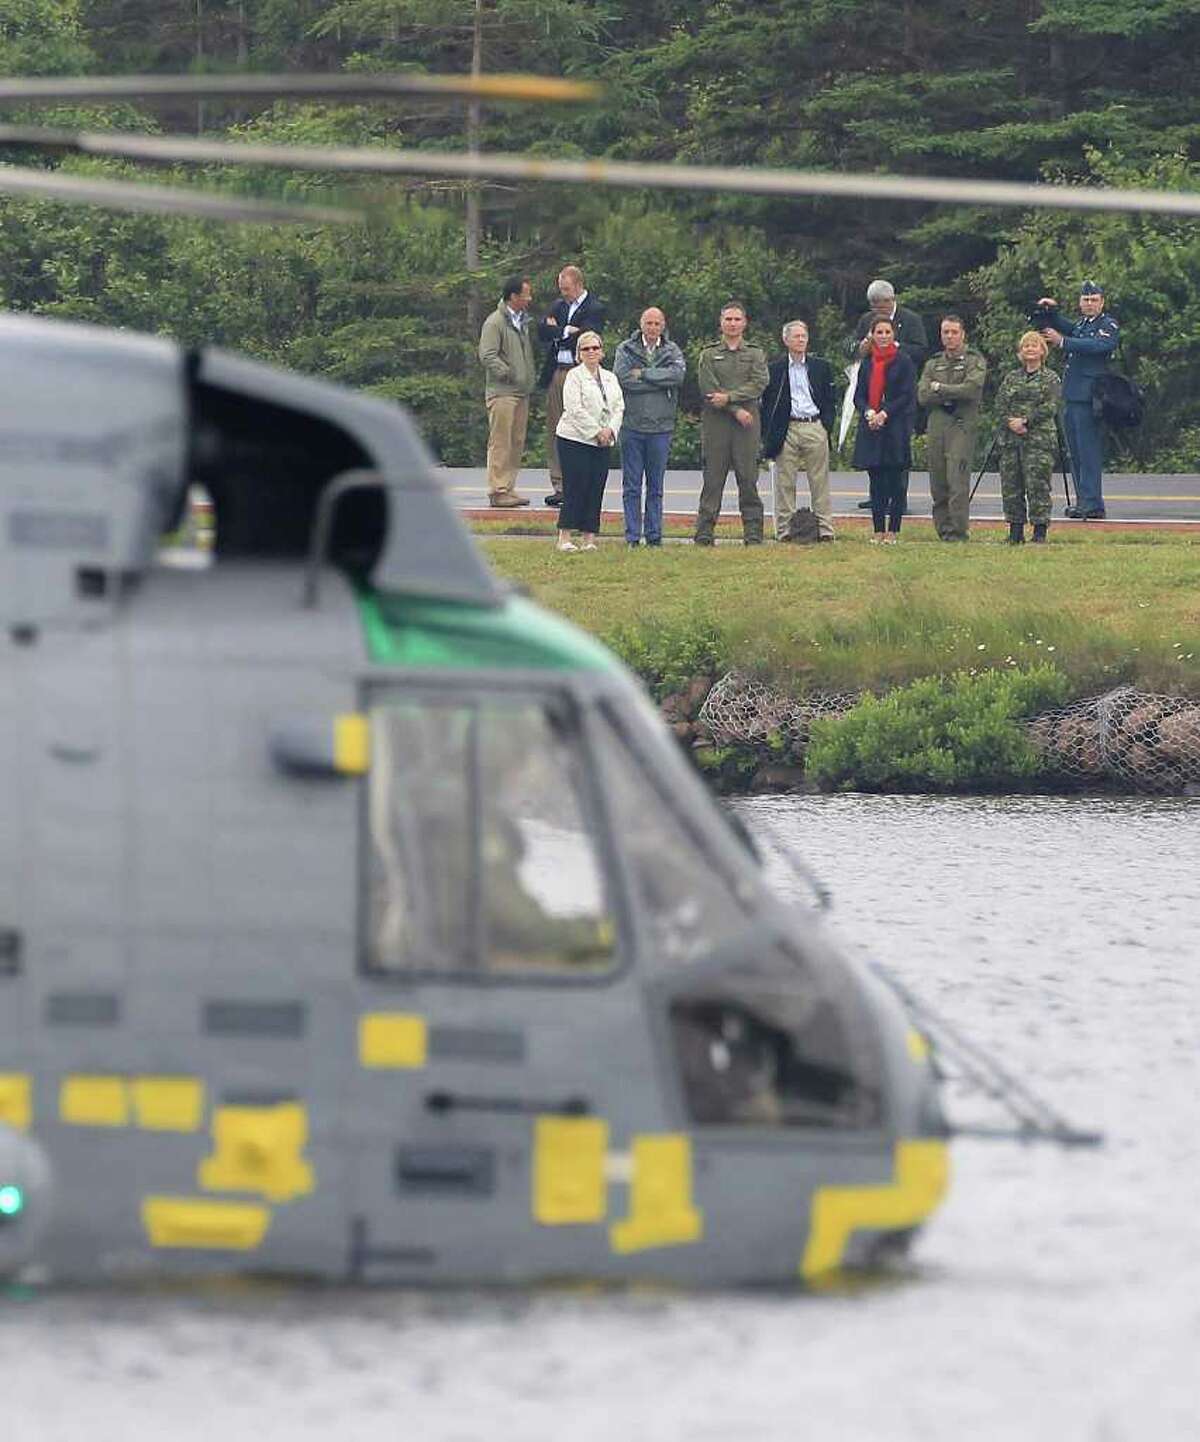 CHARLOTTETOWN, PE - JULY 04: Prince William, Duke of Cambridge takes part in an exercise in a Sea King Helicopter as Catherine, Duchess of Cambridge watches from the shore on Dalvay lake on July 4, 2011 in Charlottetown, Canada. The newly married Royal Couple are on the fifth day of their first joint overseas tour. The 12 day visit to North America is taking in some of the more remote areas of the country such as Prince Edward Island, Yellowknife and Calgary. The Royal couple started off their tour by joining millions of Canadians in taking part in Canada Day celebrations which mark Canada's 144th Birthday. (Photo by Chris Jackson/Getty Images)